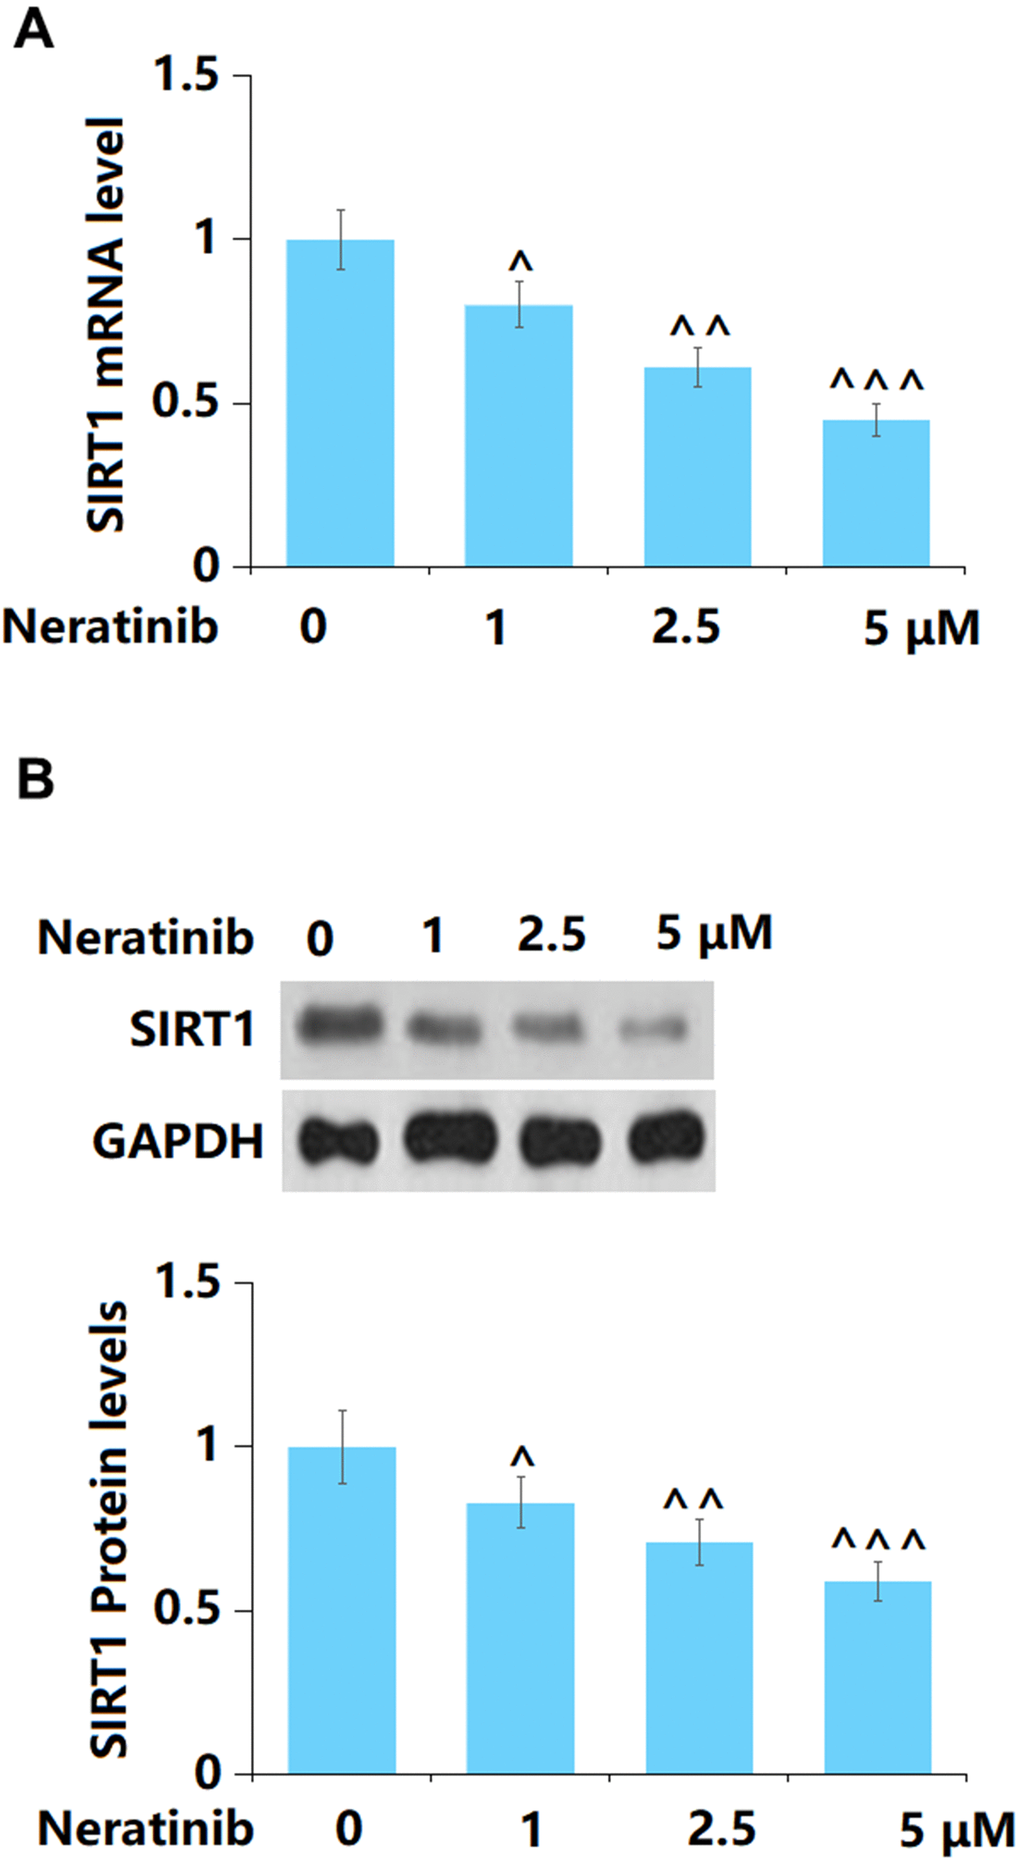 The effects of Neratinib in the expression of SIRT1. (A) mRNA of SIRT1; (B) Protein levels of SIRT1 as measured by Western blot (^, ^^, ^^^, P